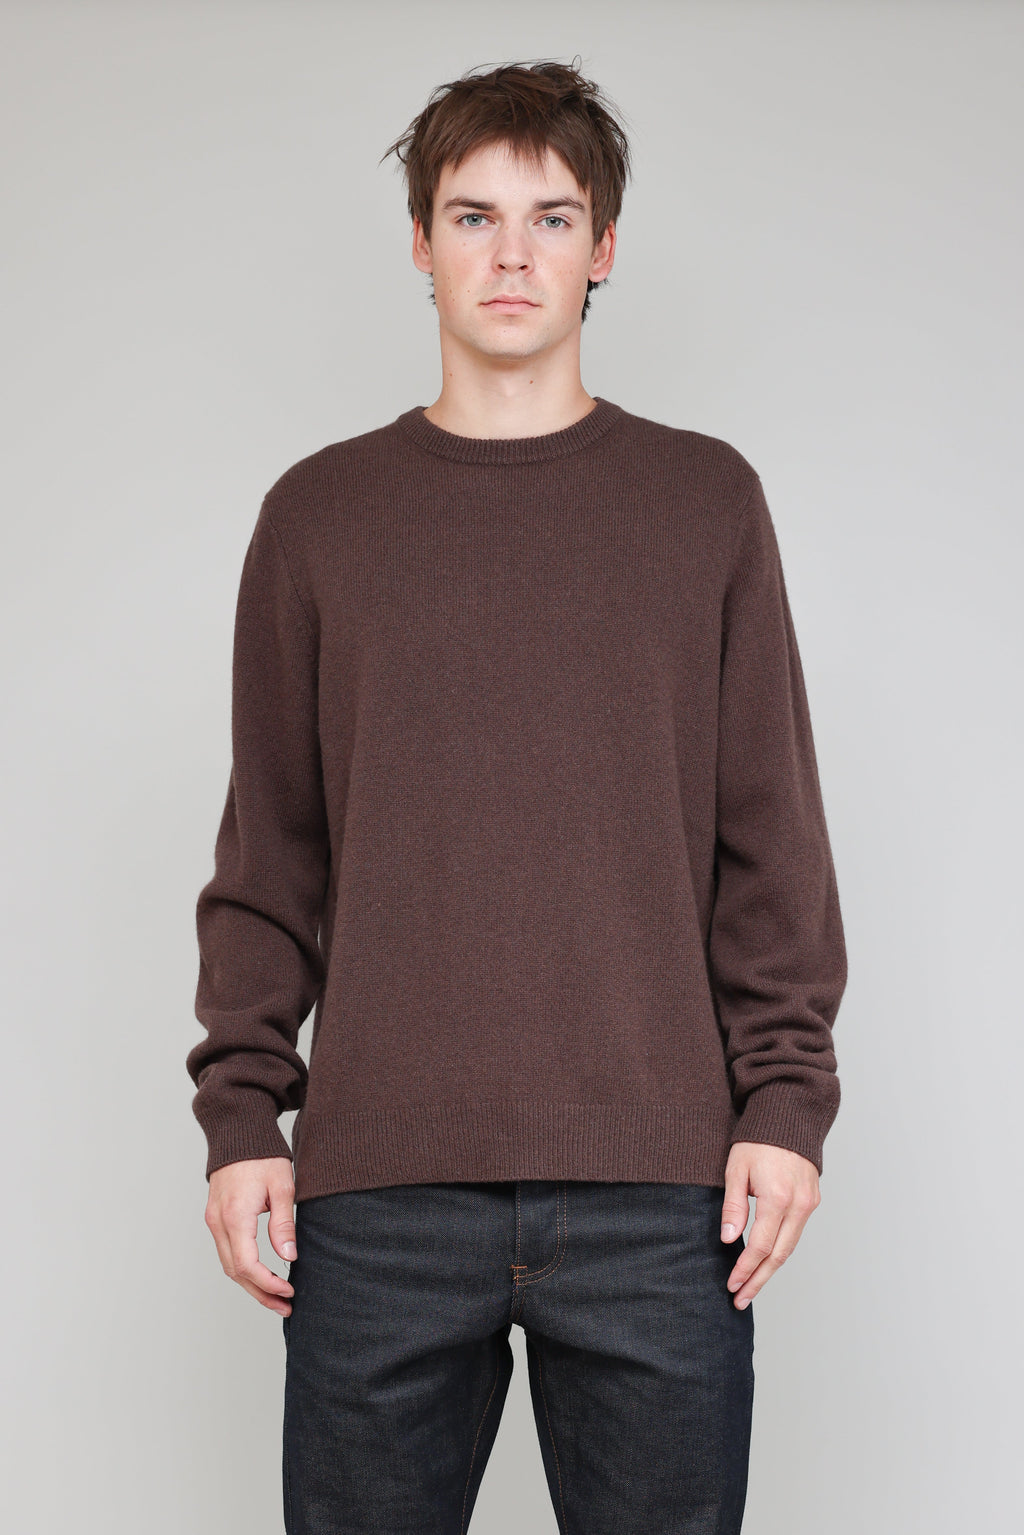 New Wool Crew in Brown 02